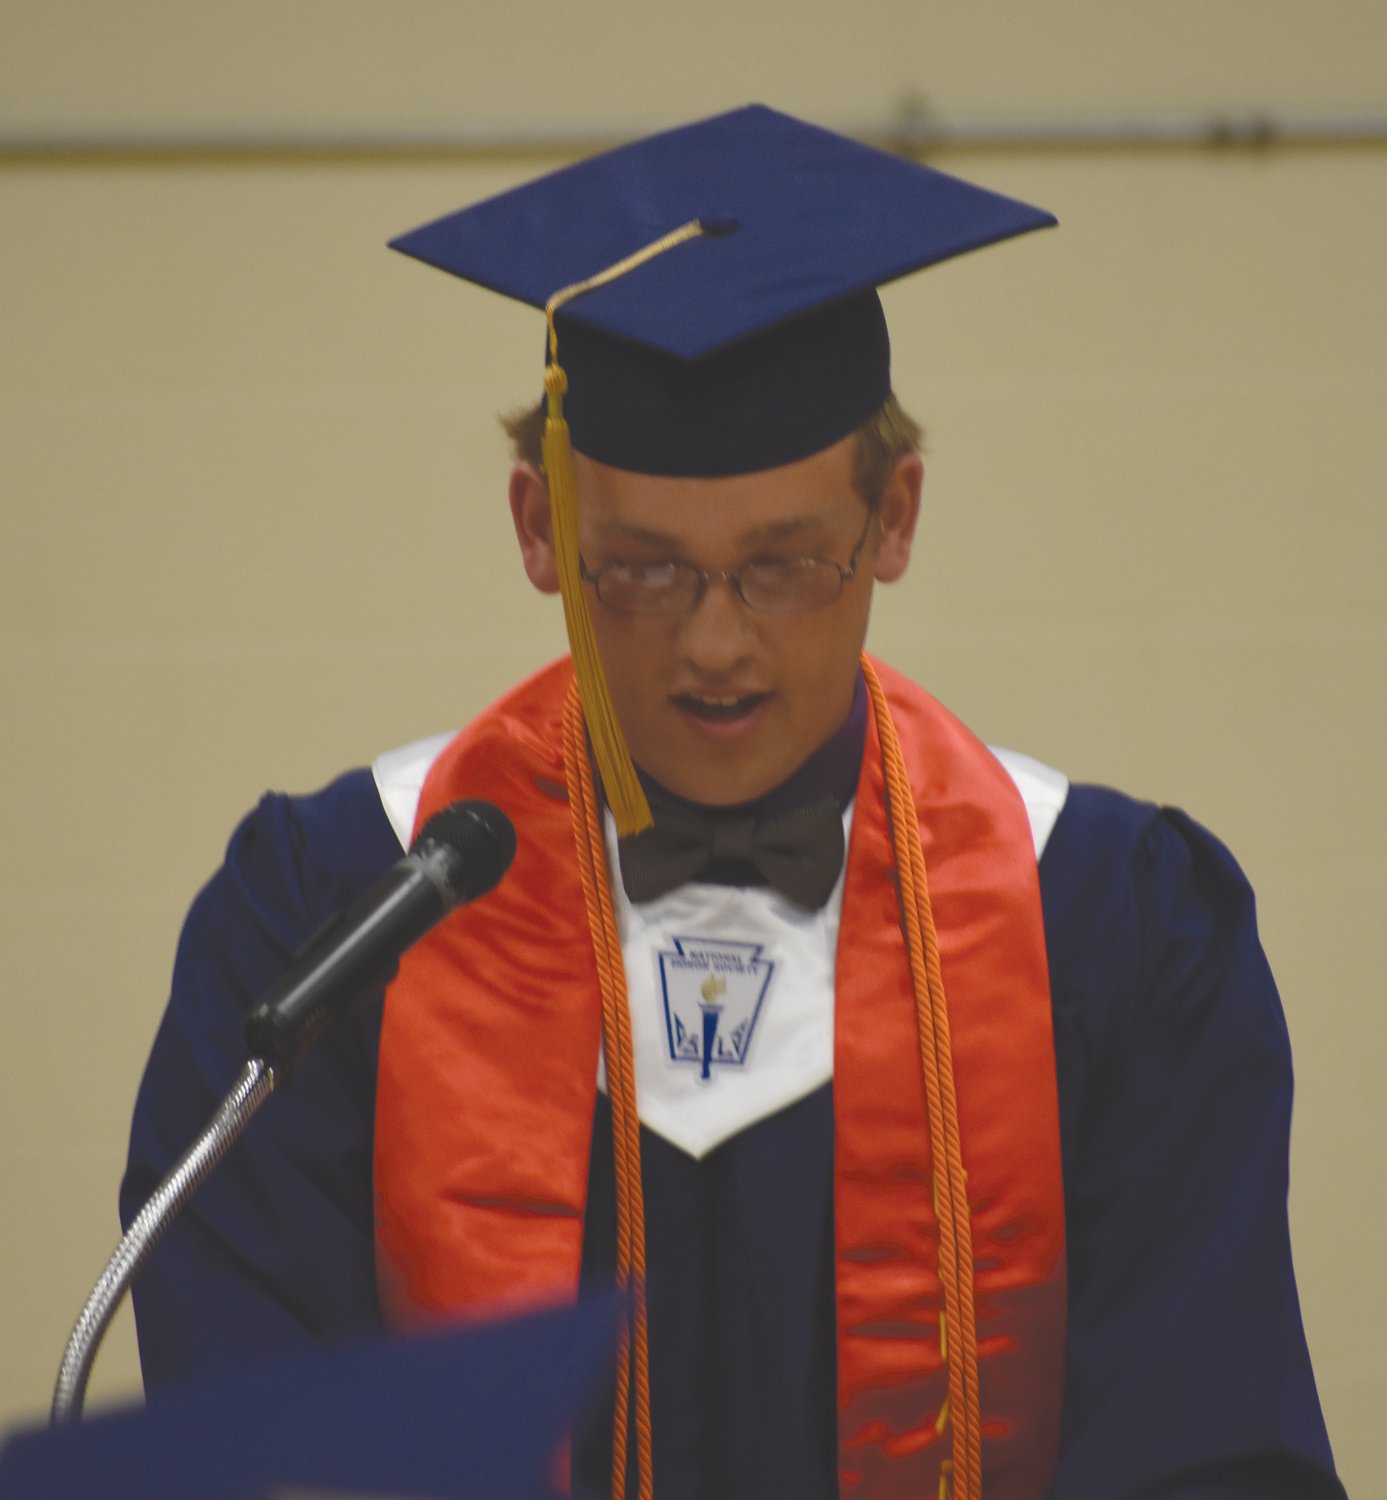 Nathan Summers speaks to his fellow graduates.